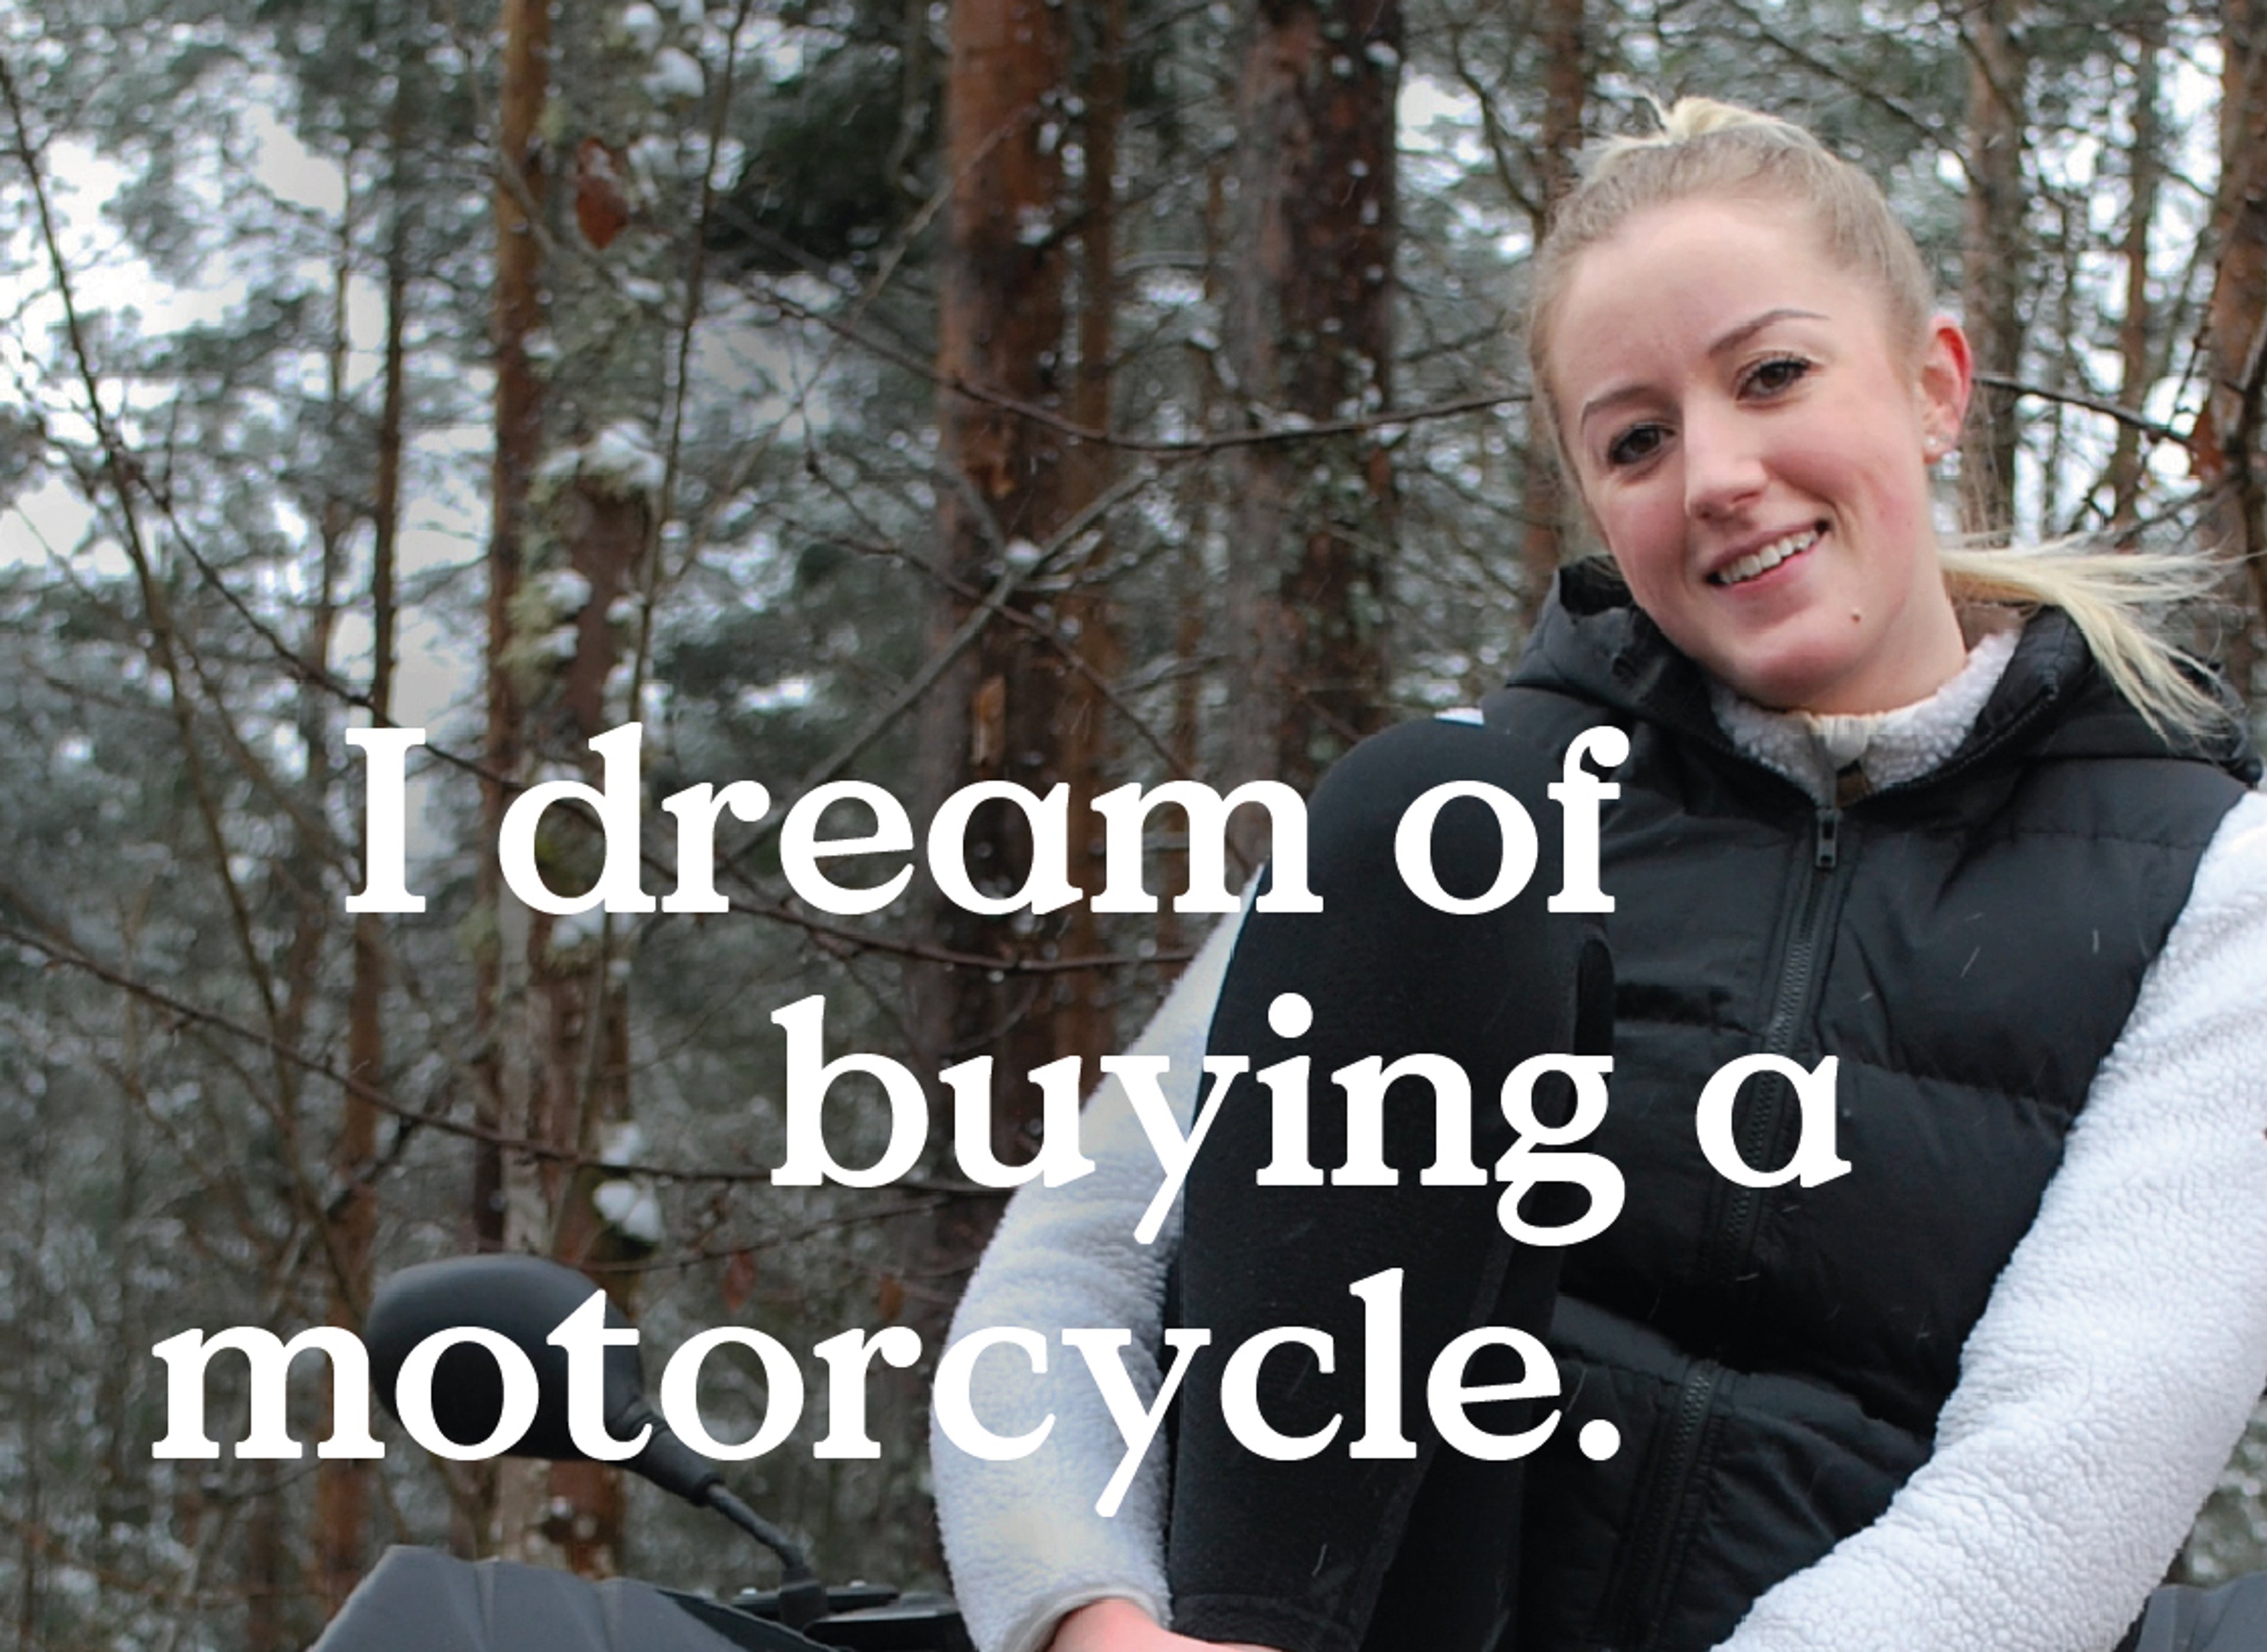 I dream of buying a motorcycle.